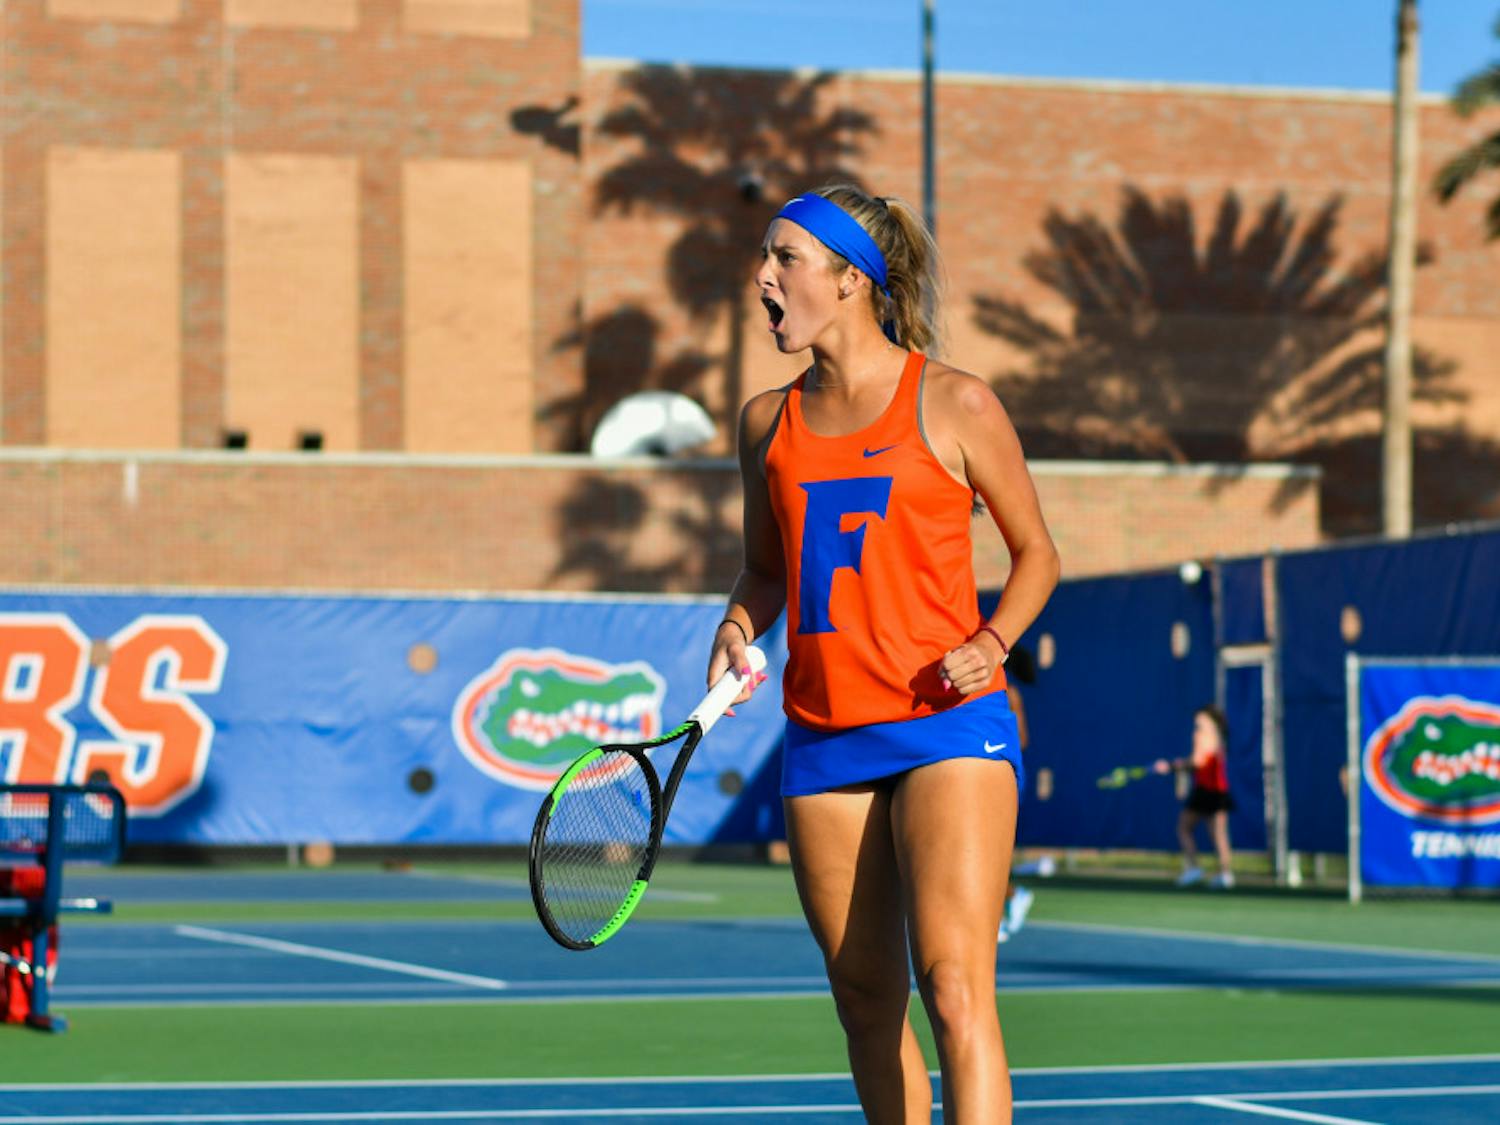 McCartney Kessler will compete in the final of the ITA Southeast Regional Championship in Tallahassee on Monday. She will face off against Georgia’s Lea Ma. Kessler earned two victories on Sunday. 